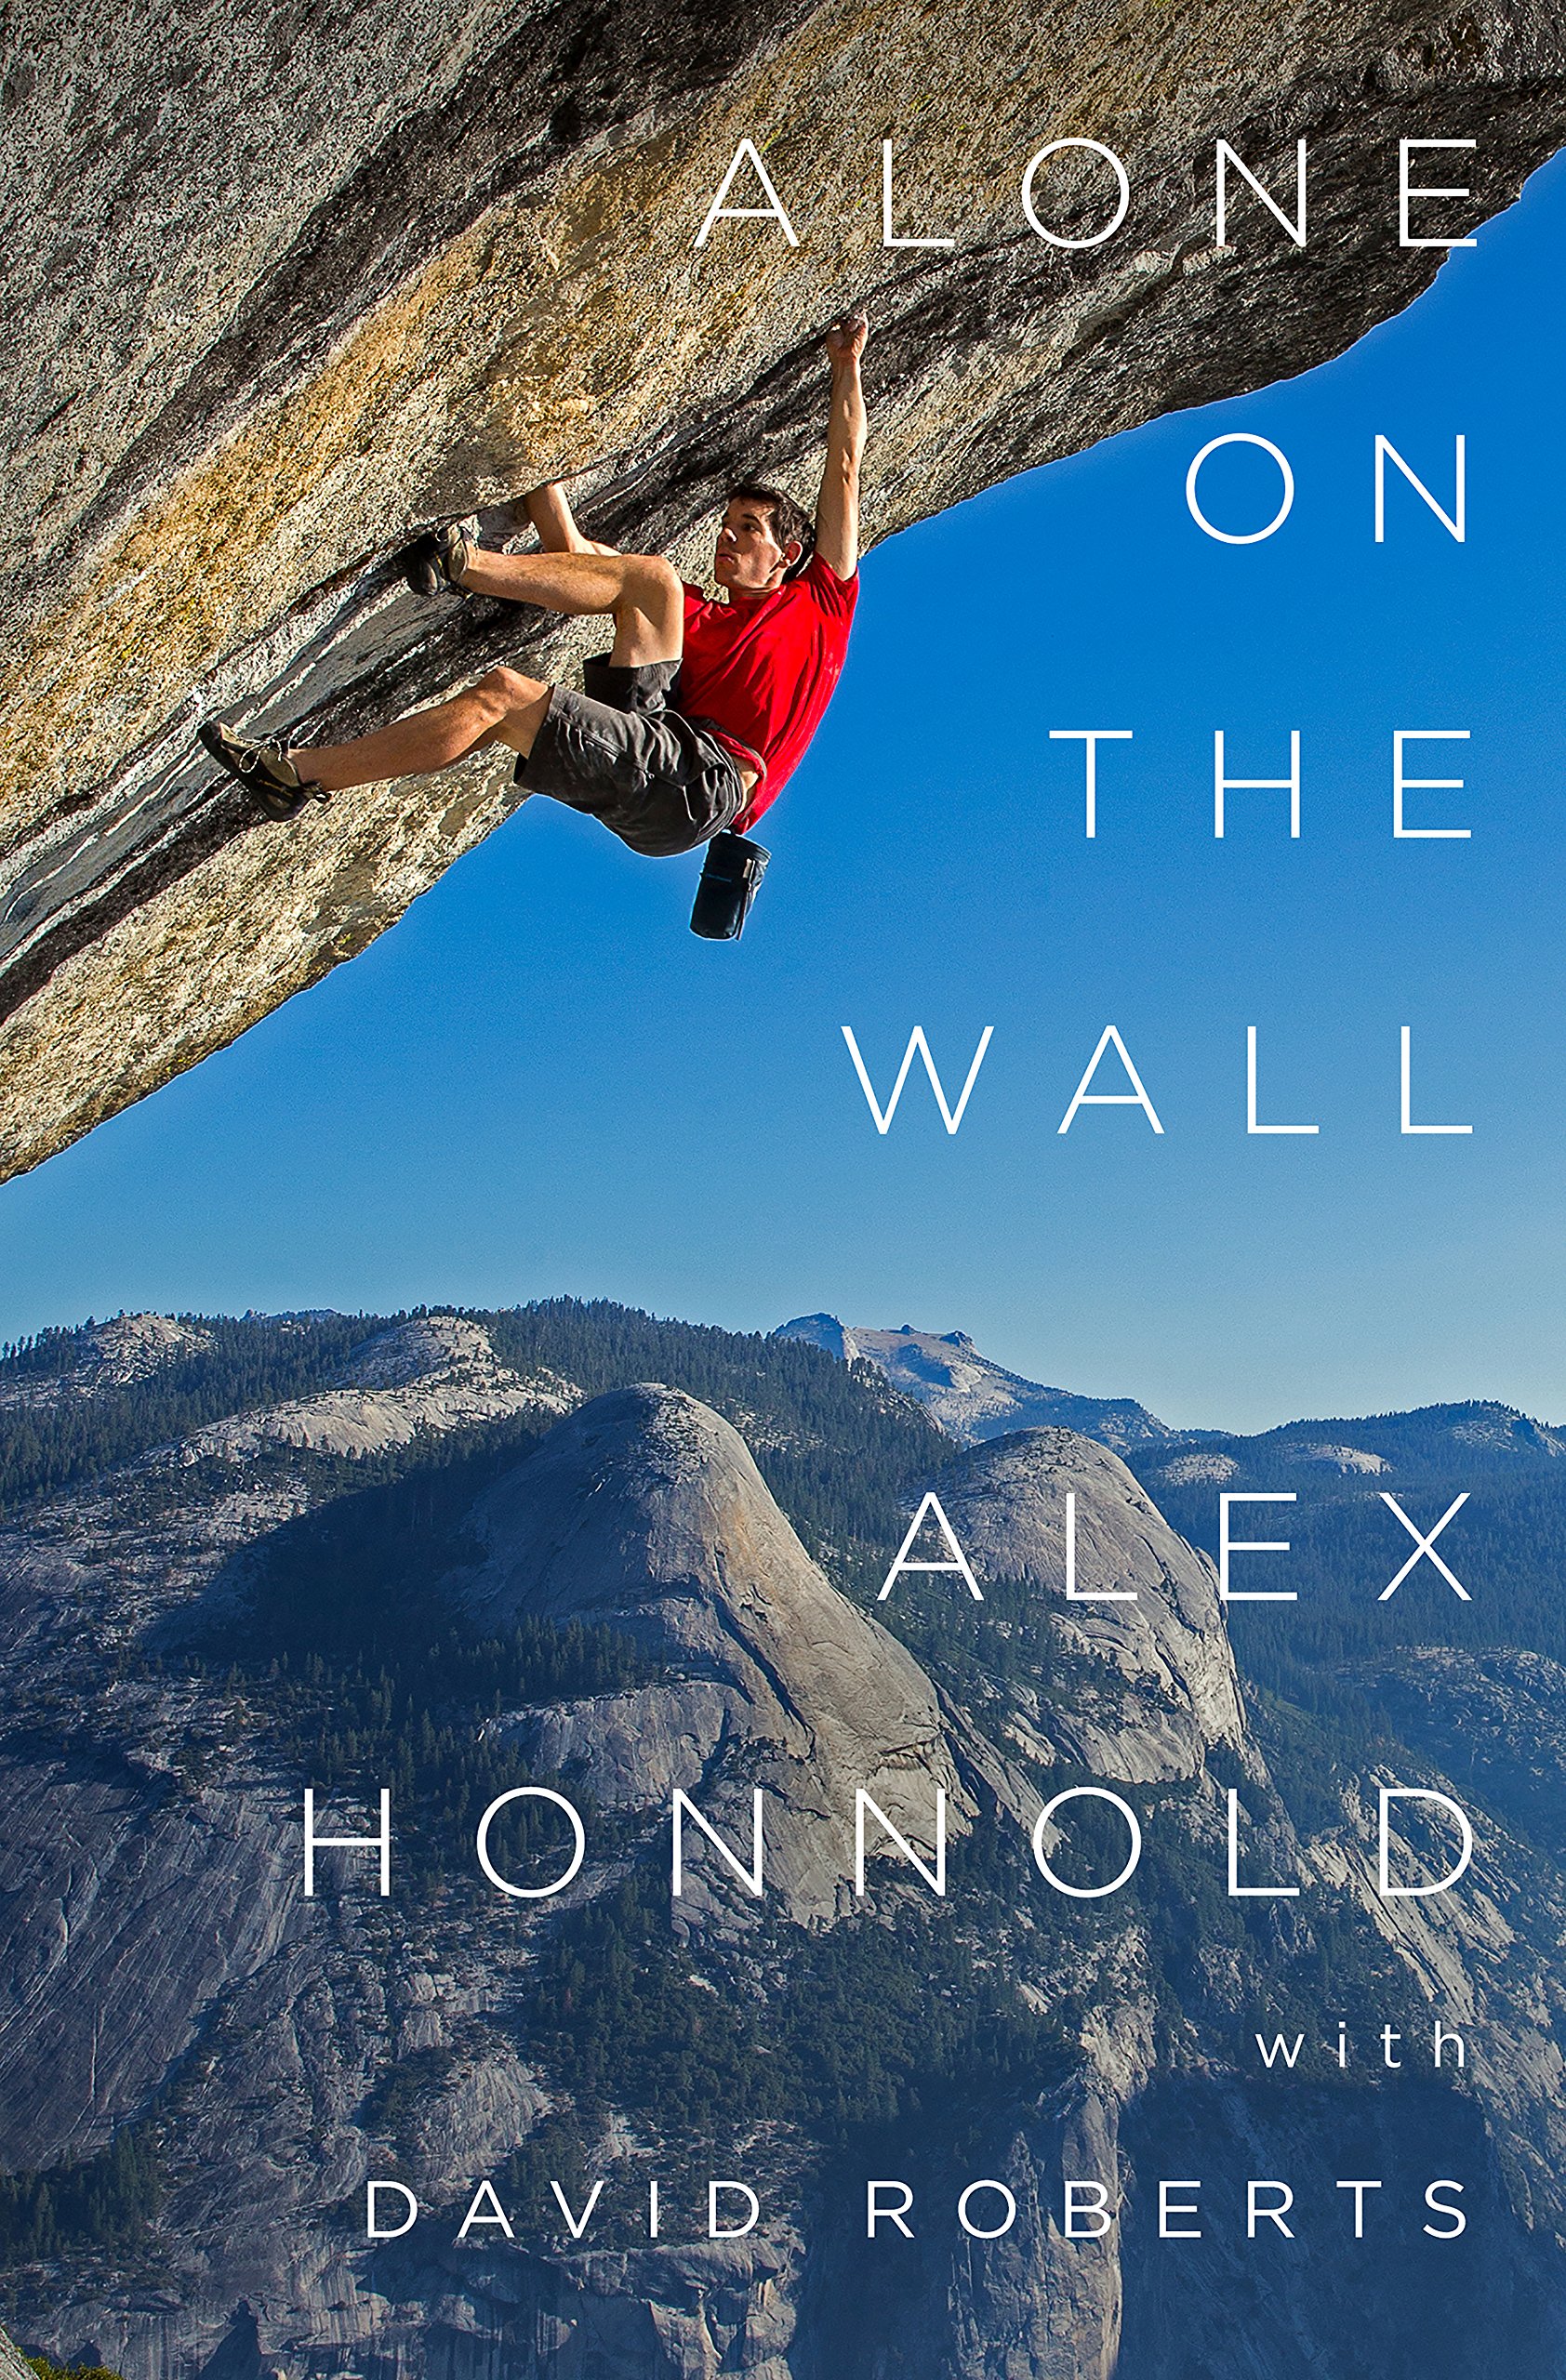 Alex Honnold. “Alone on the Wall” 